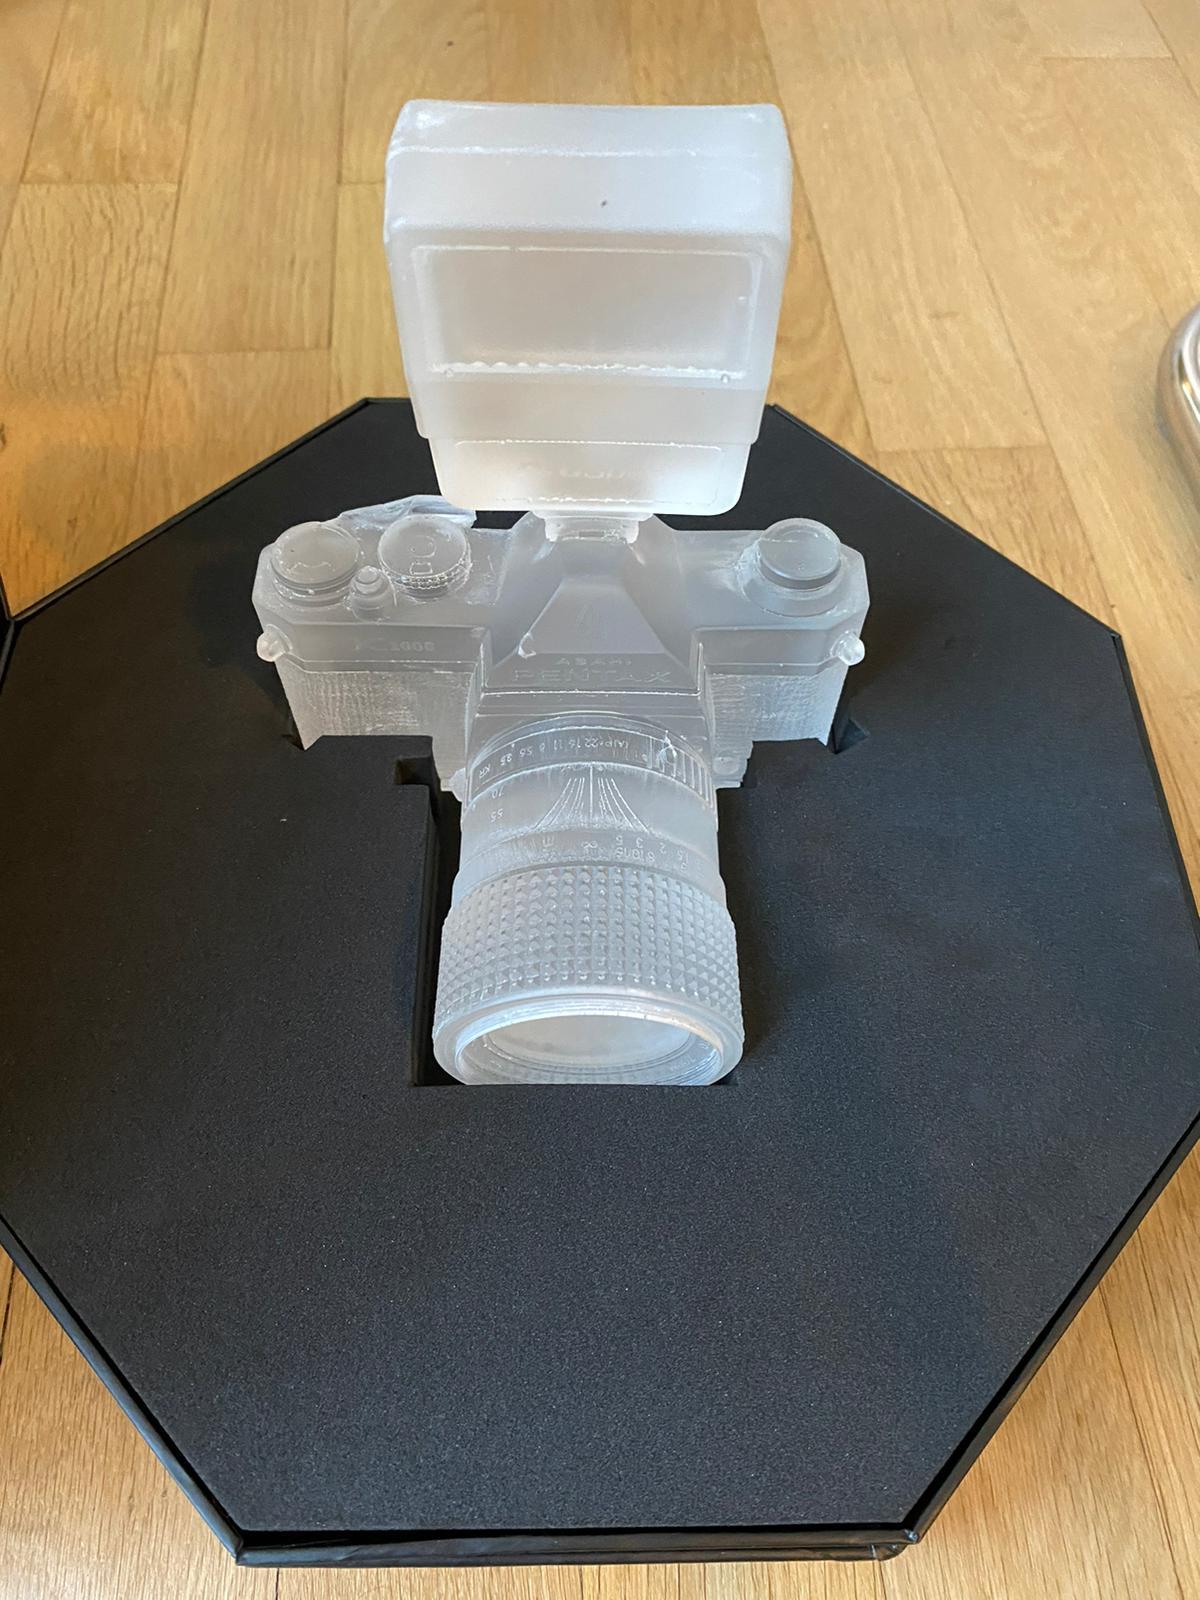 CRYSTAL RELIC 003 – CAMERA - Sculpture by Daniel Arsham